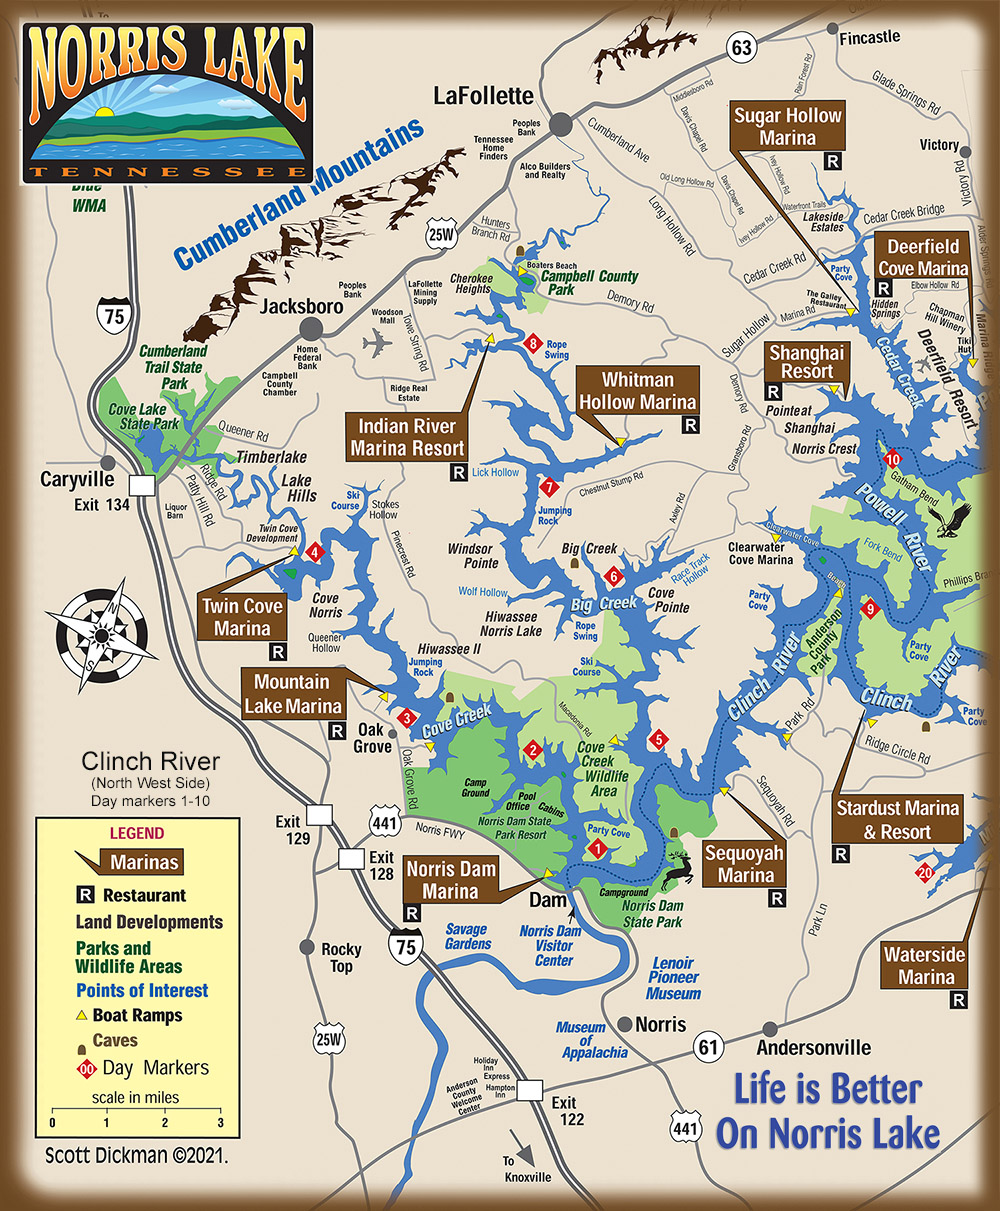 Norris Lake Map Clinch Ricer North West